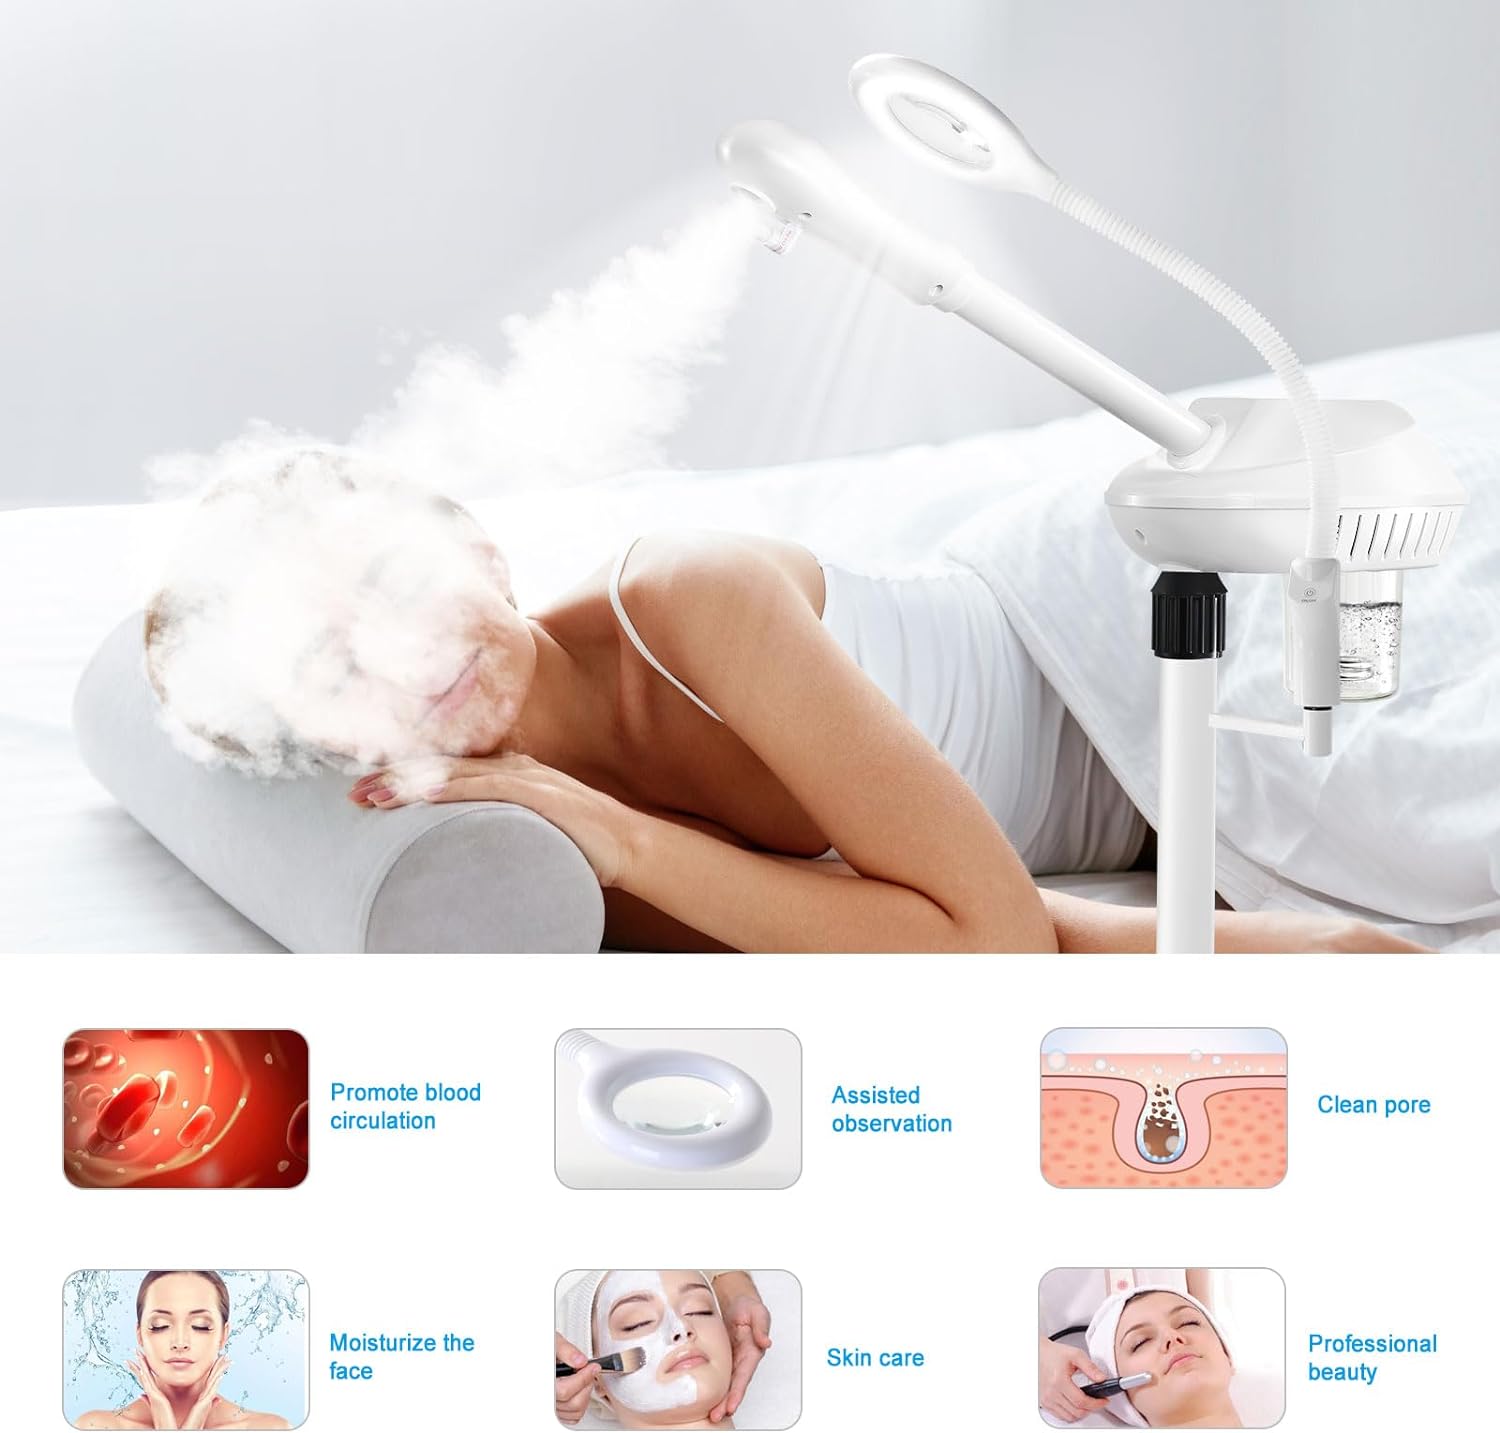 Chetunju Professional 2 in 1 Facial Steamer for Ozone Humidifier Atomizer Attach 5× Magnifier and Light, Face Steamer Clean Skin Firming Pores and Moisturizing Suitable for a Beauty, Spa, at Home